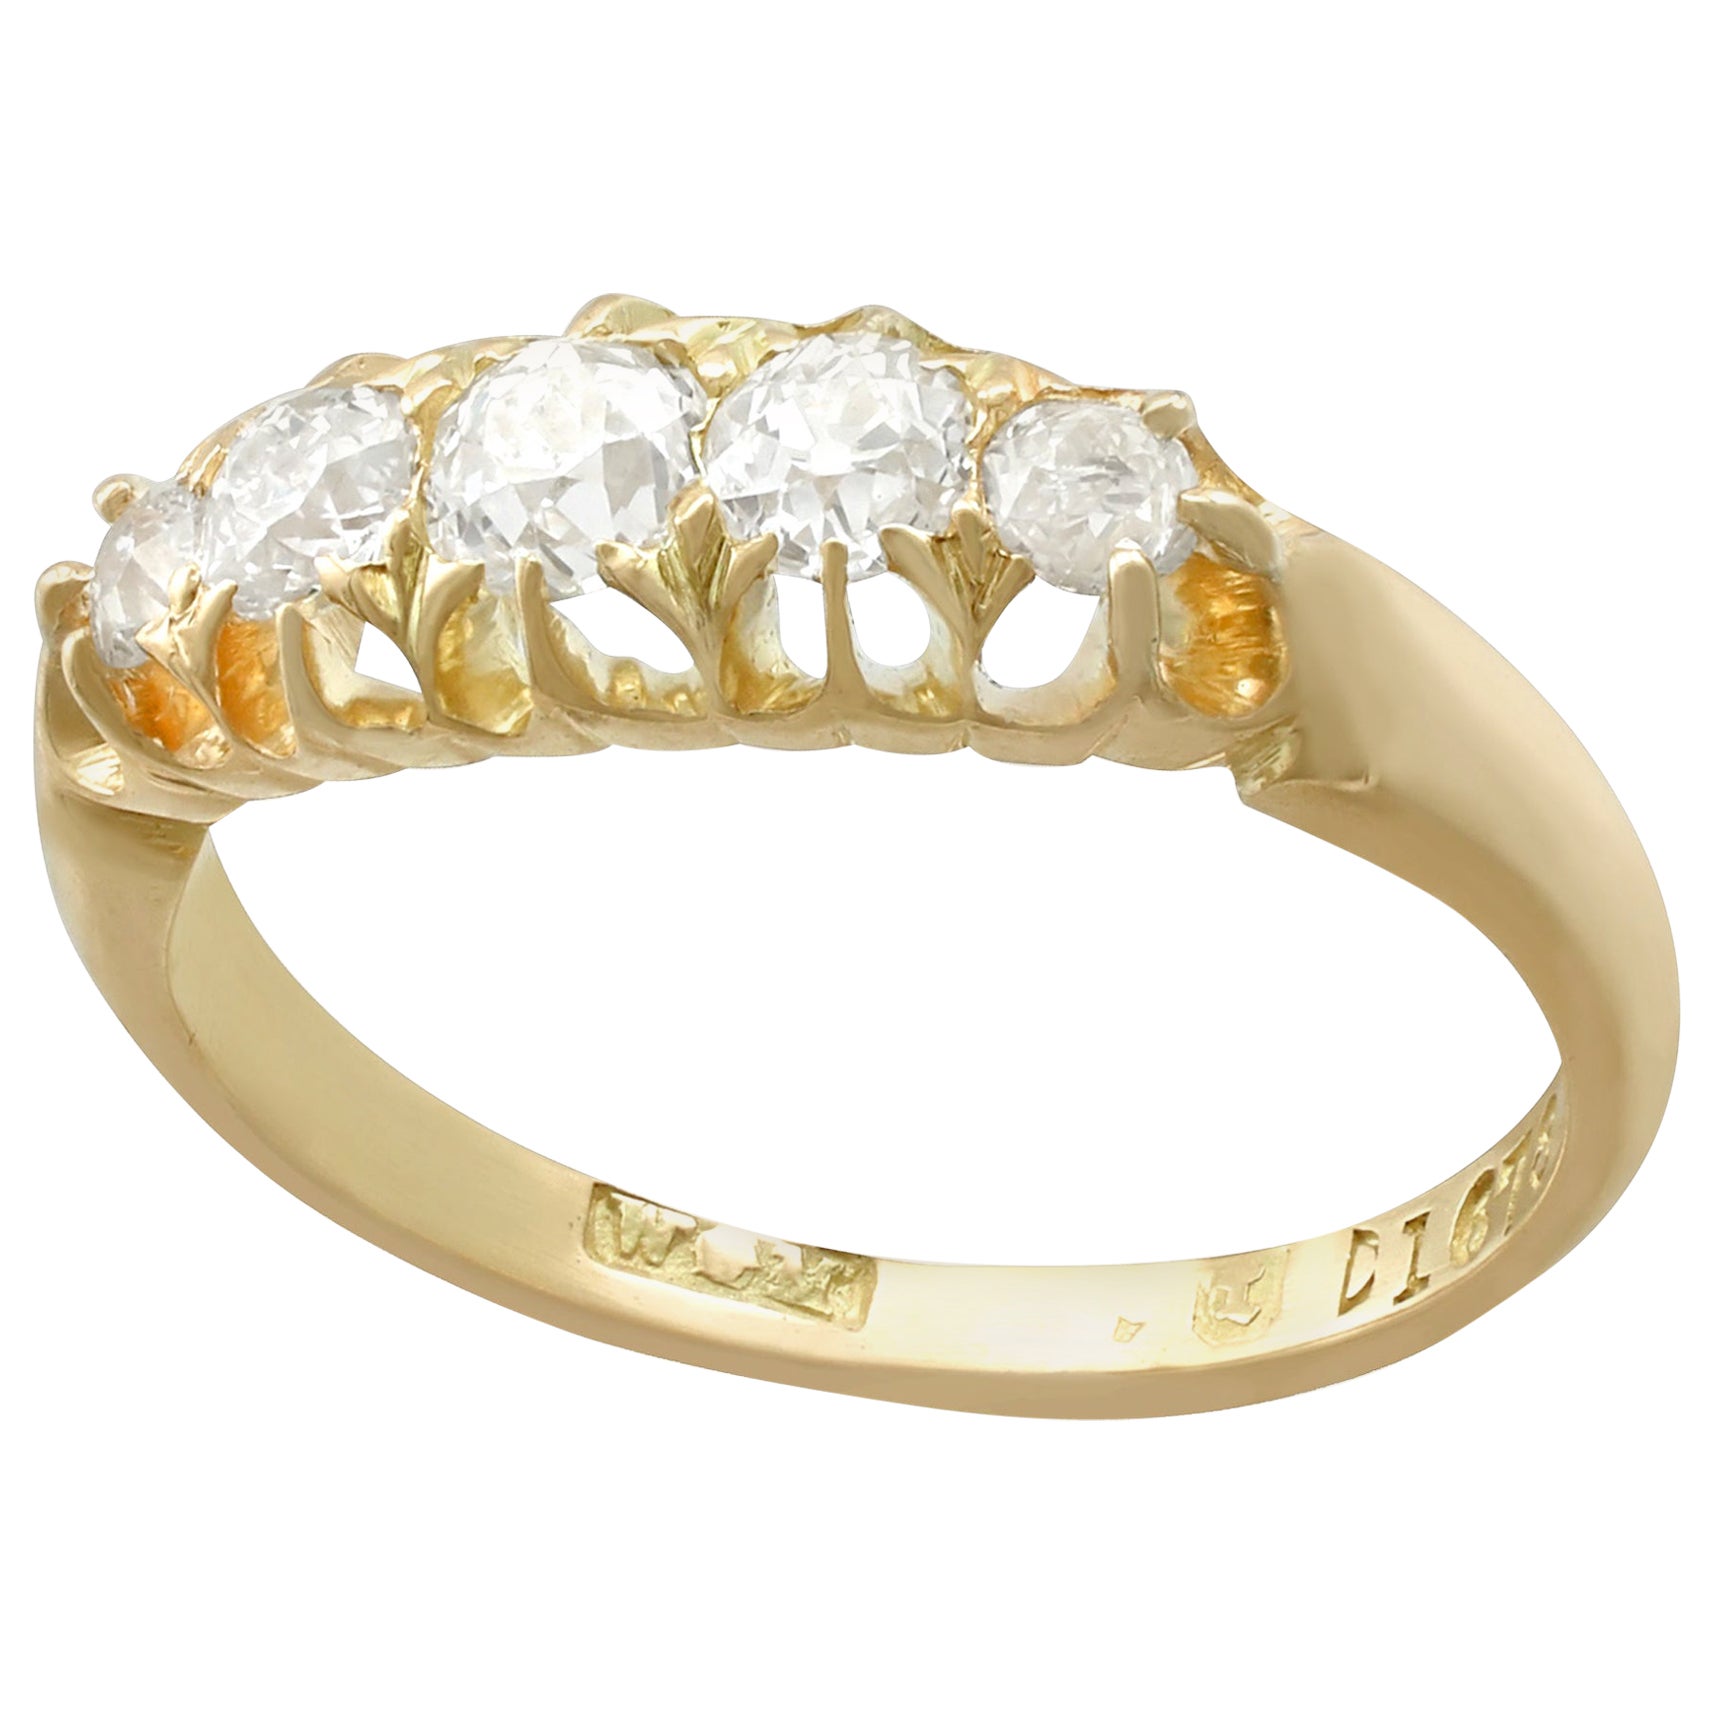 ANTIQUE VICTORIAN Diamond Platinum and Gold Ring at 1stDibs